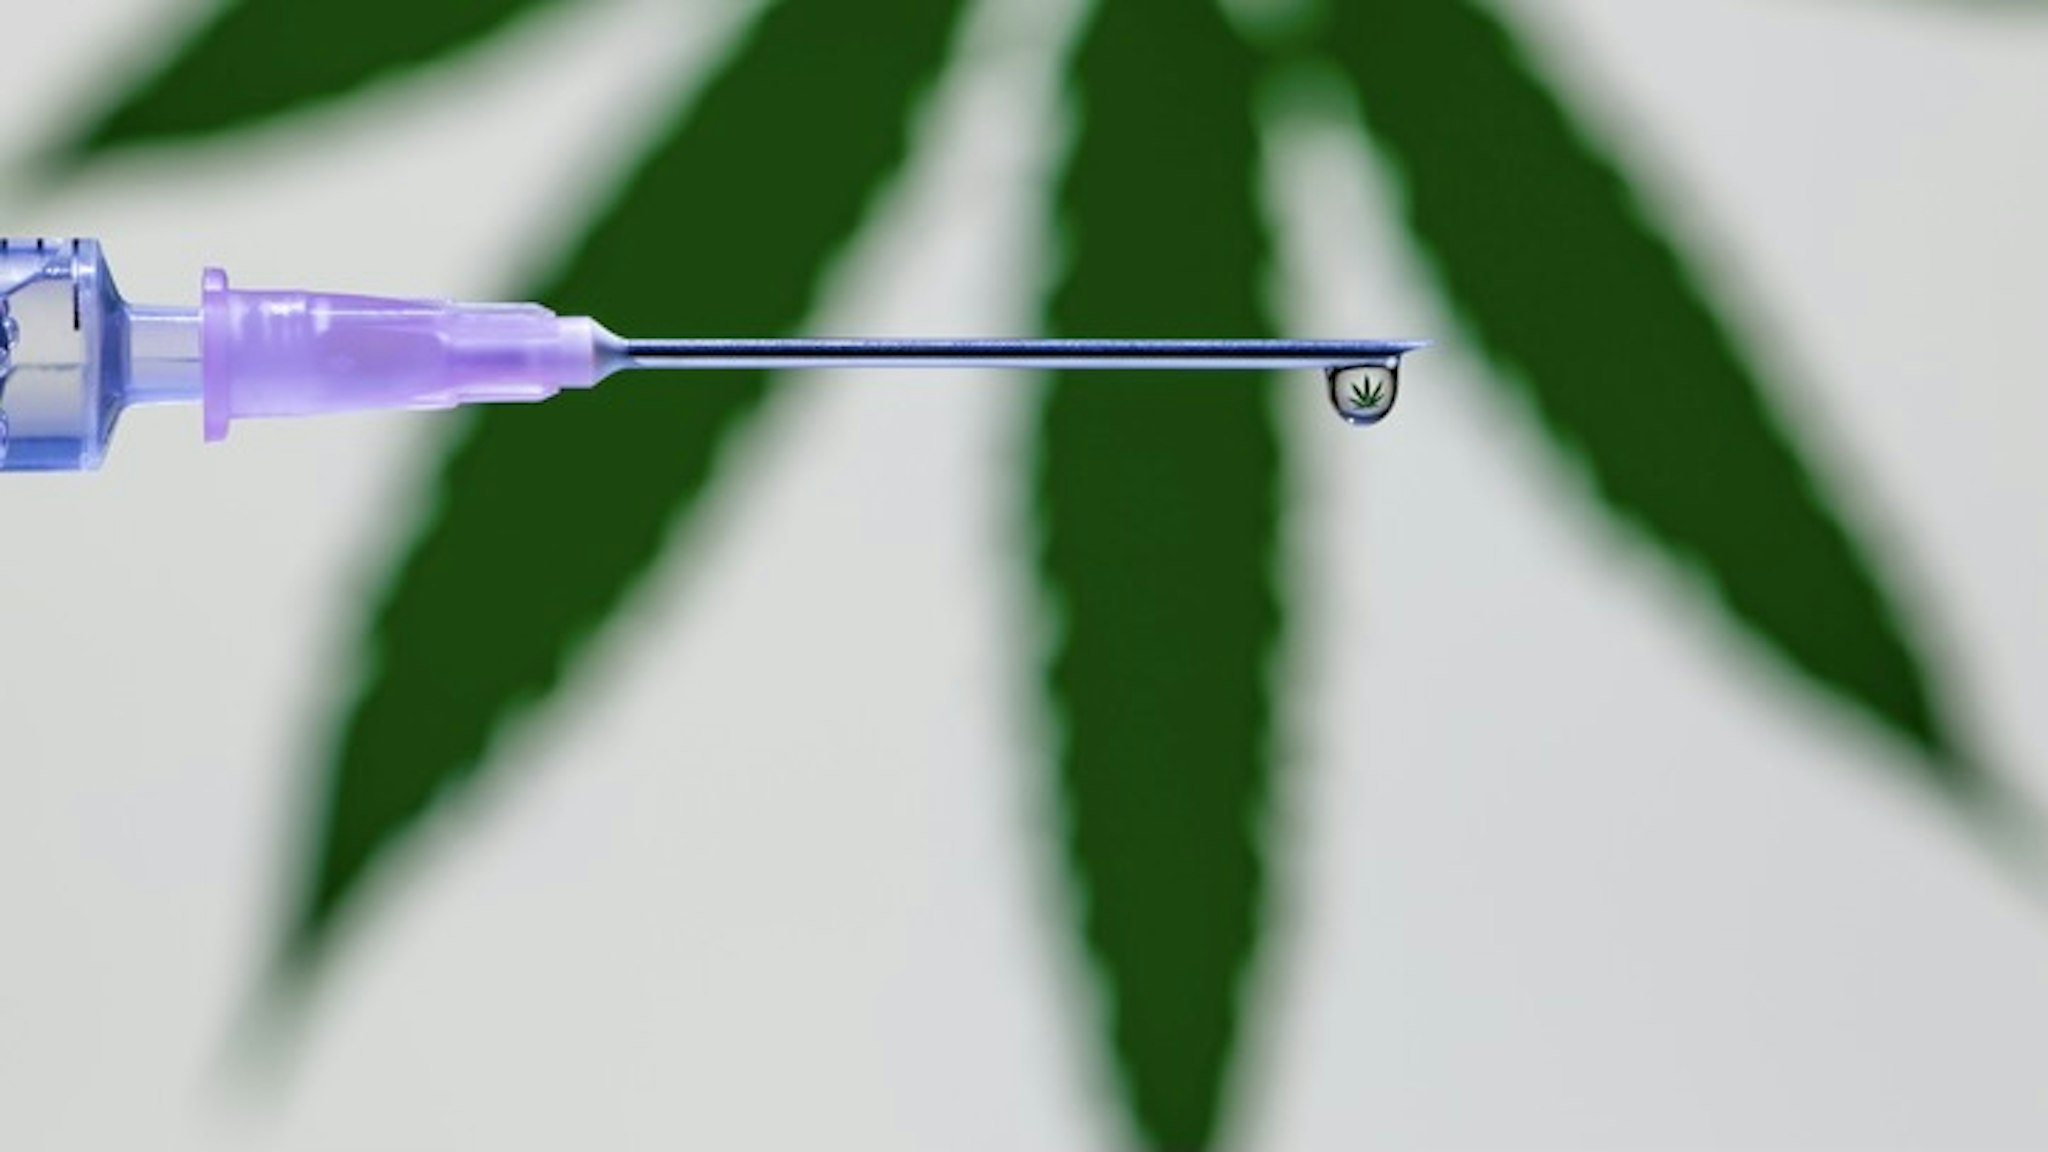 A droplet of vaccine at the tip of the needle and syringe reflecting the marijuana leaf - stock photo A droplet of vaccine at the tip of the needle and syringe reflecting the marijuana leaf Phichaklim1 via Getty Images